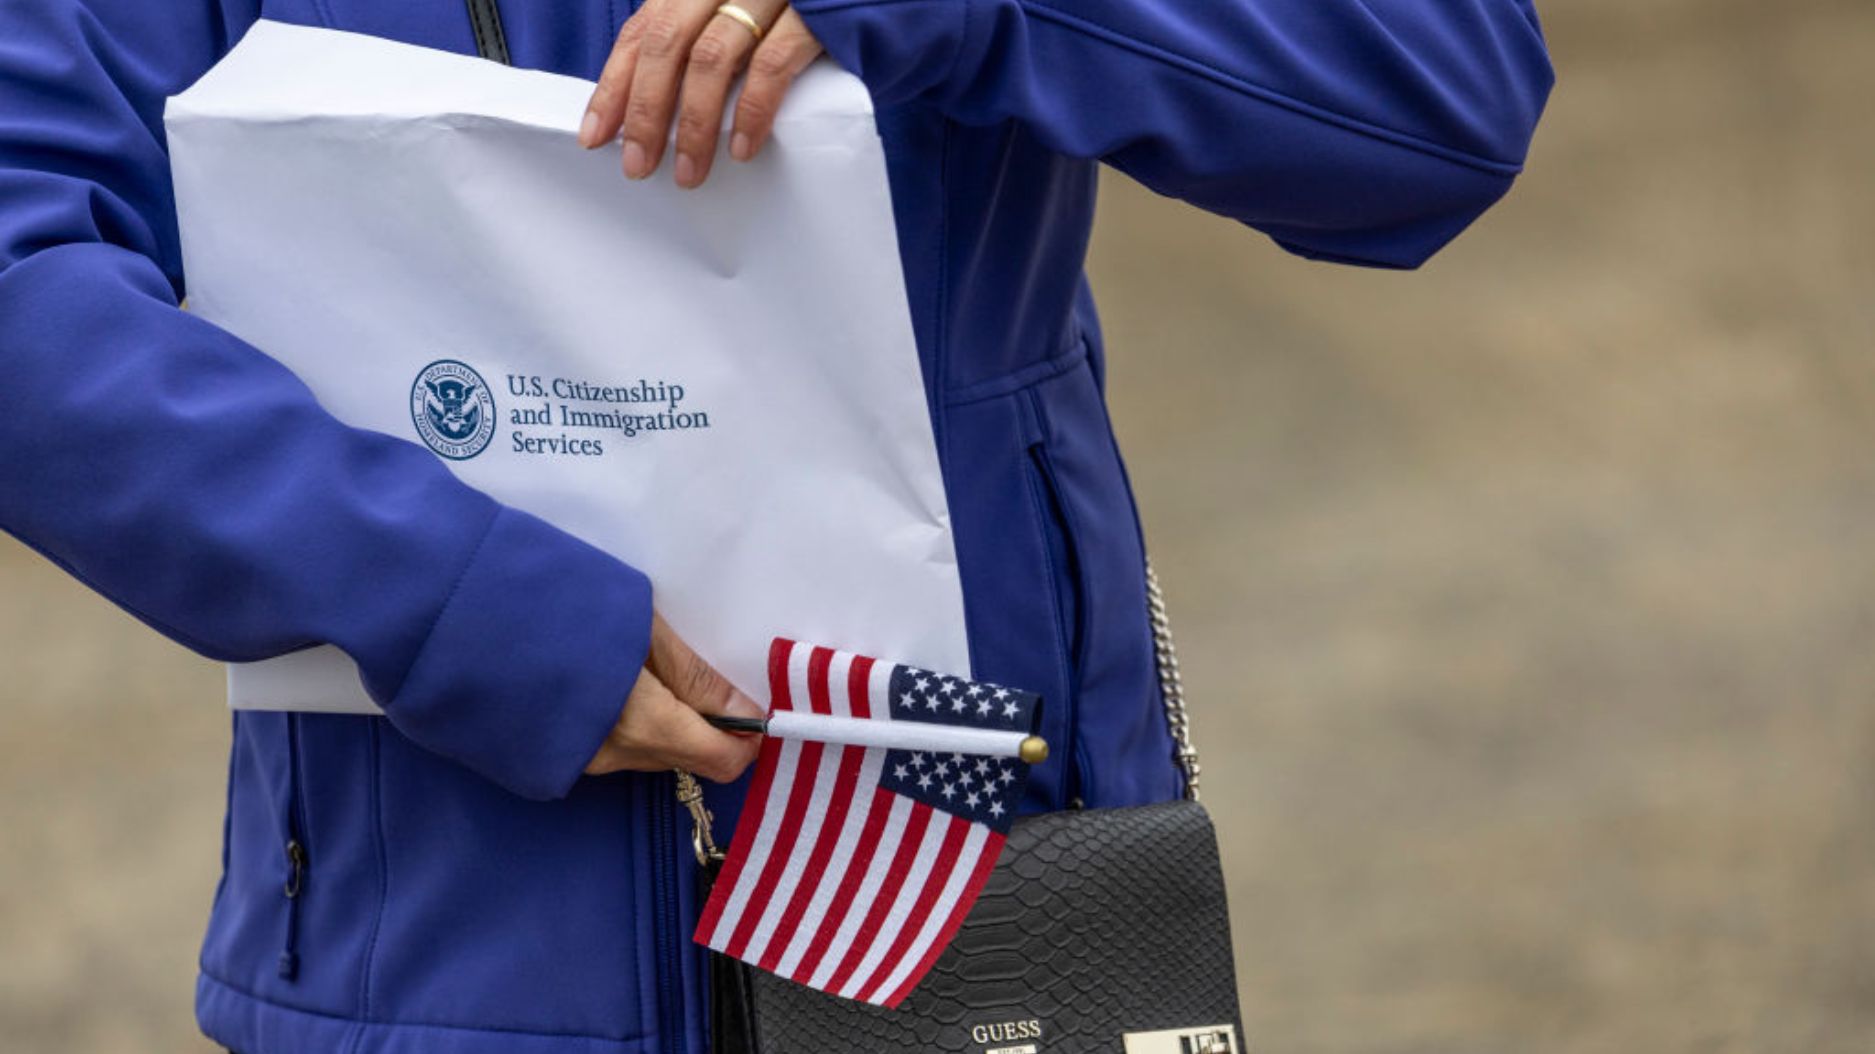 Applying for US citizenship is going to increase in price.  This will cost